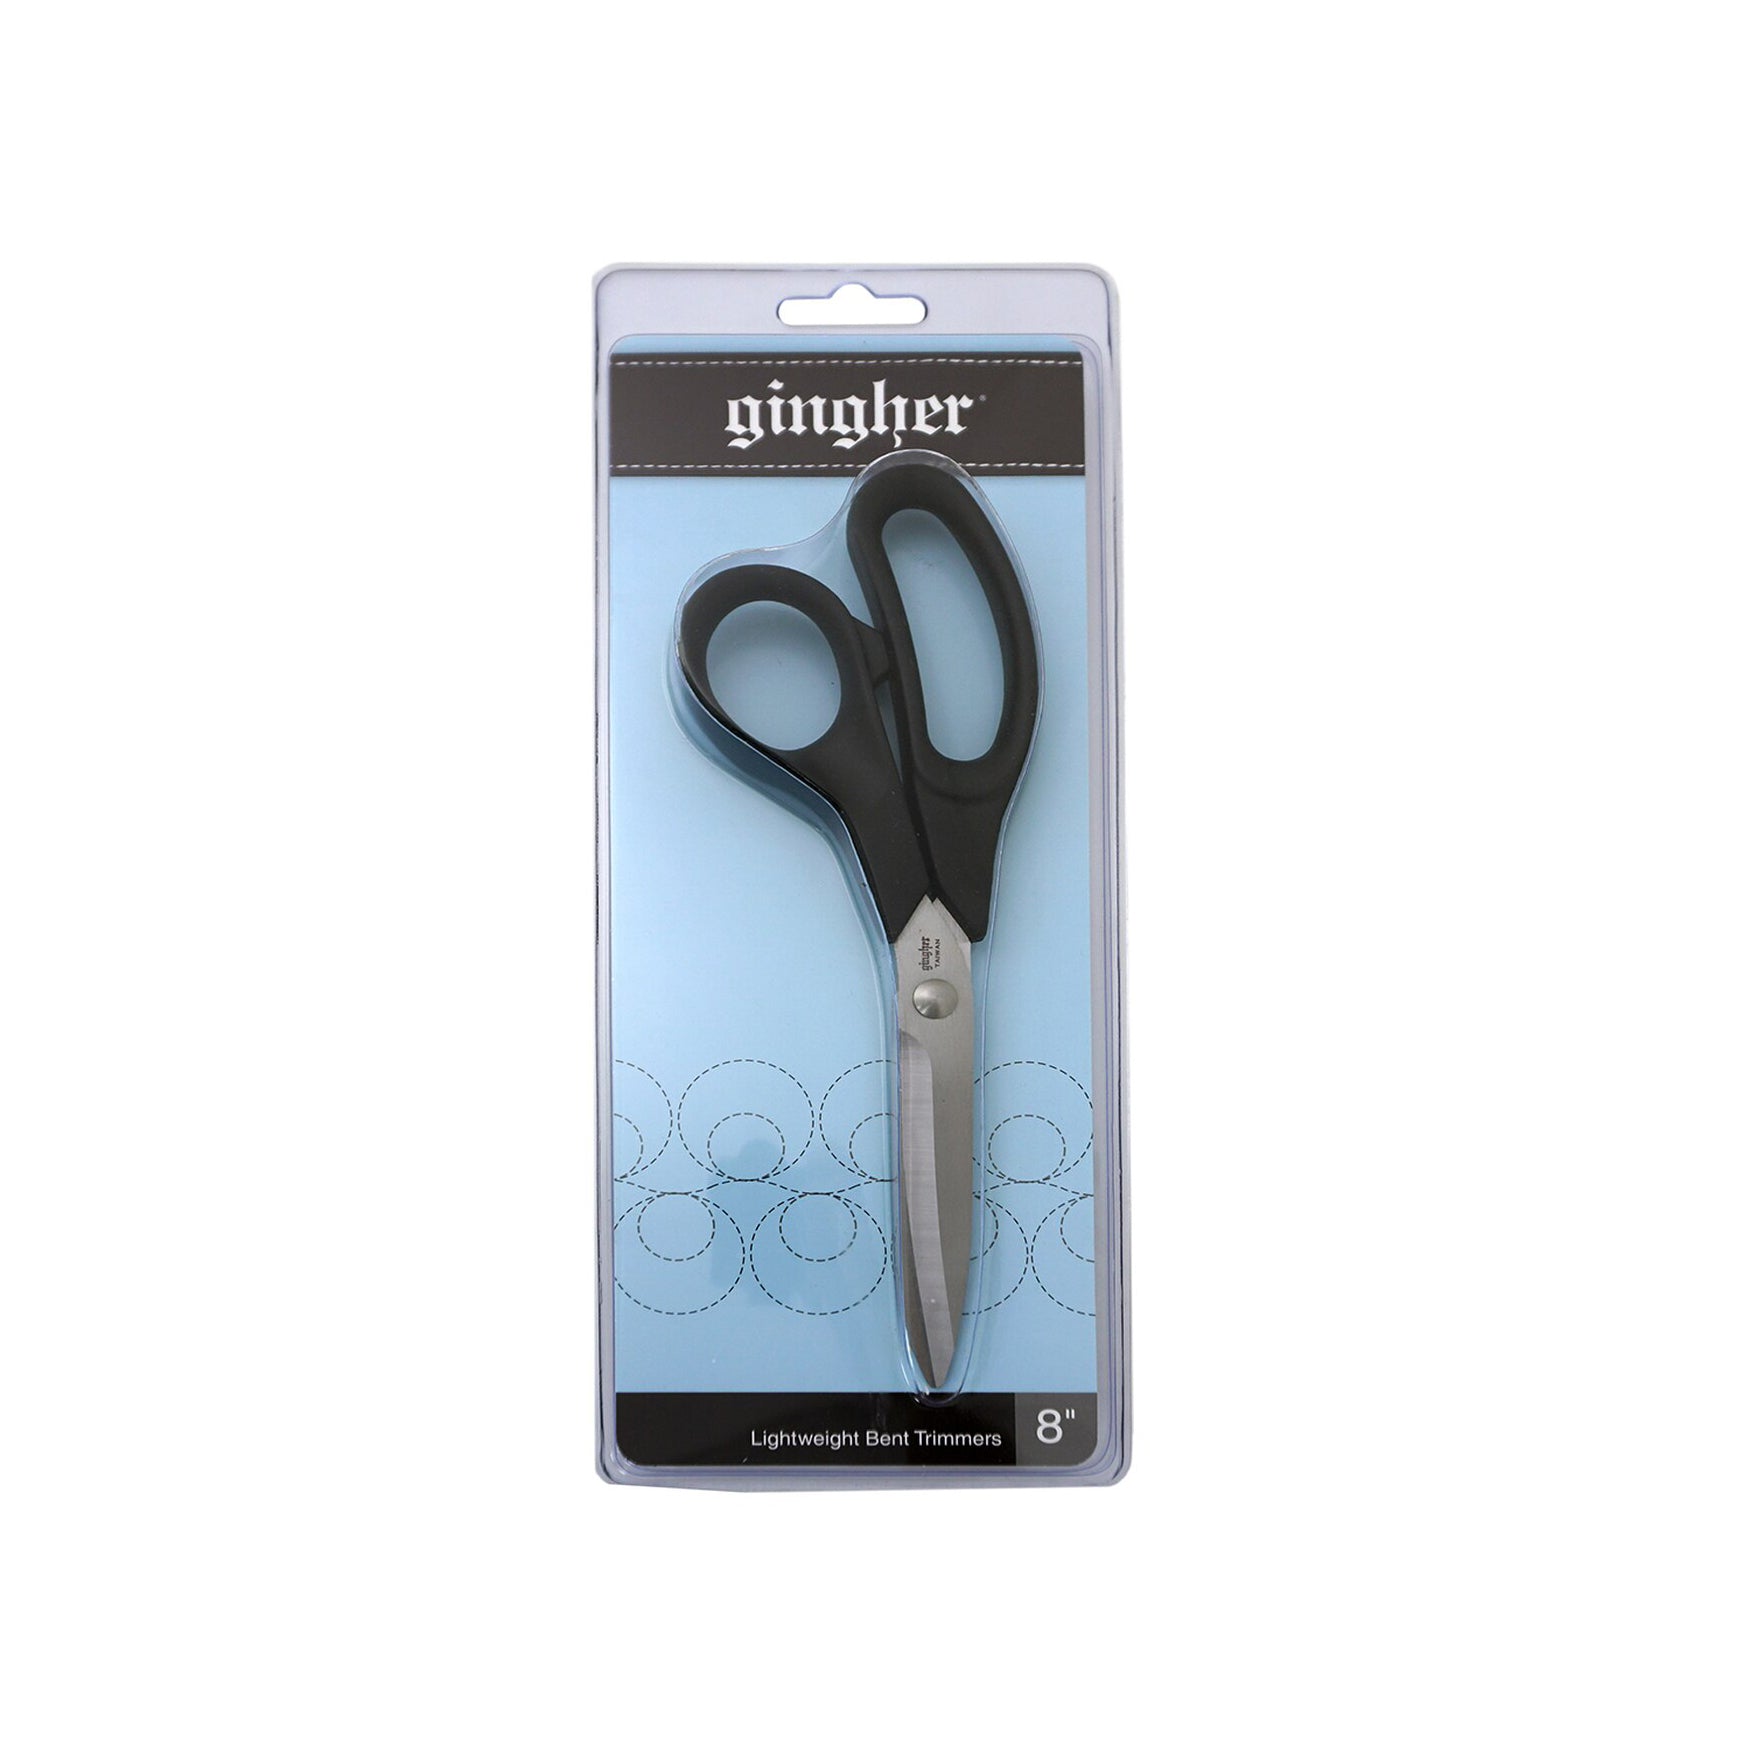 Gingher Sewing Scissors & Shears in Sewing & Cutting Tools